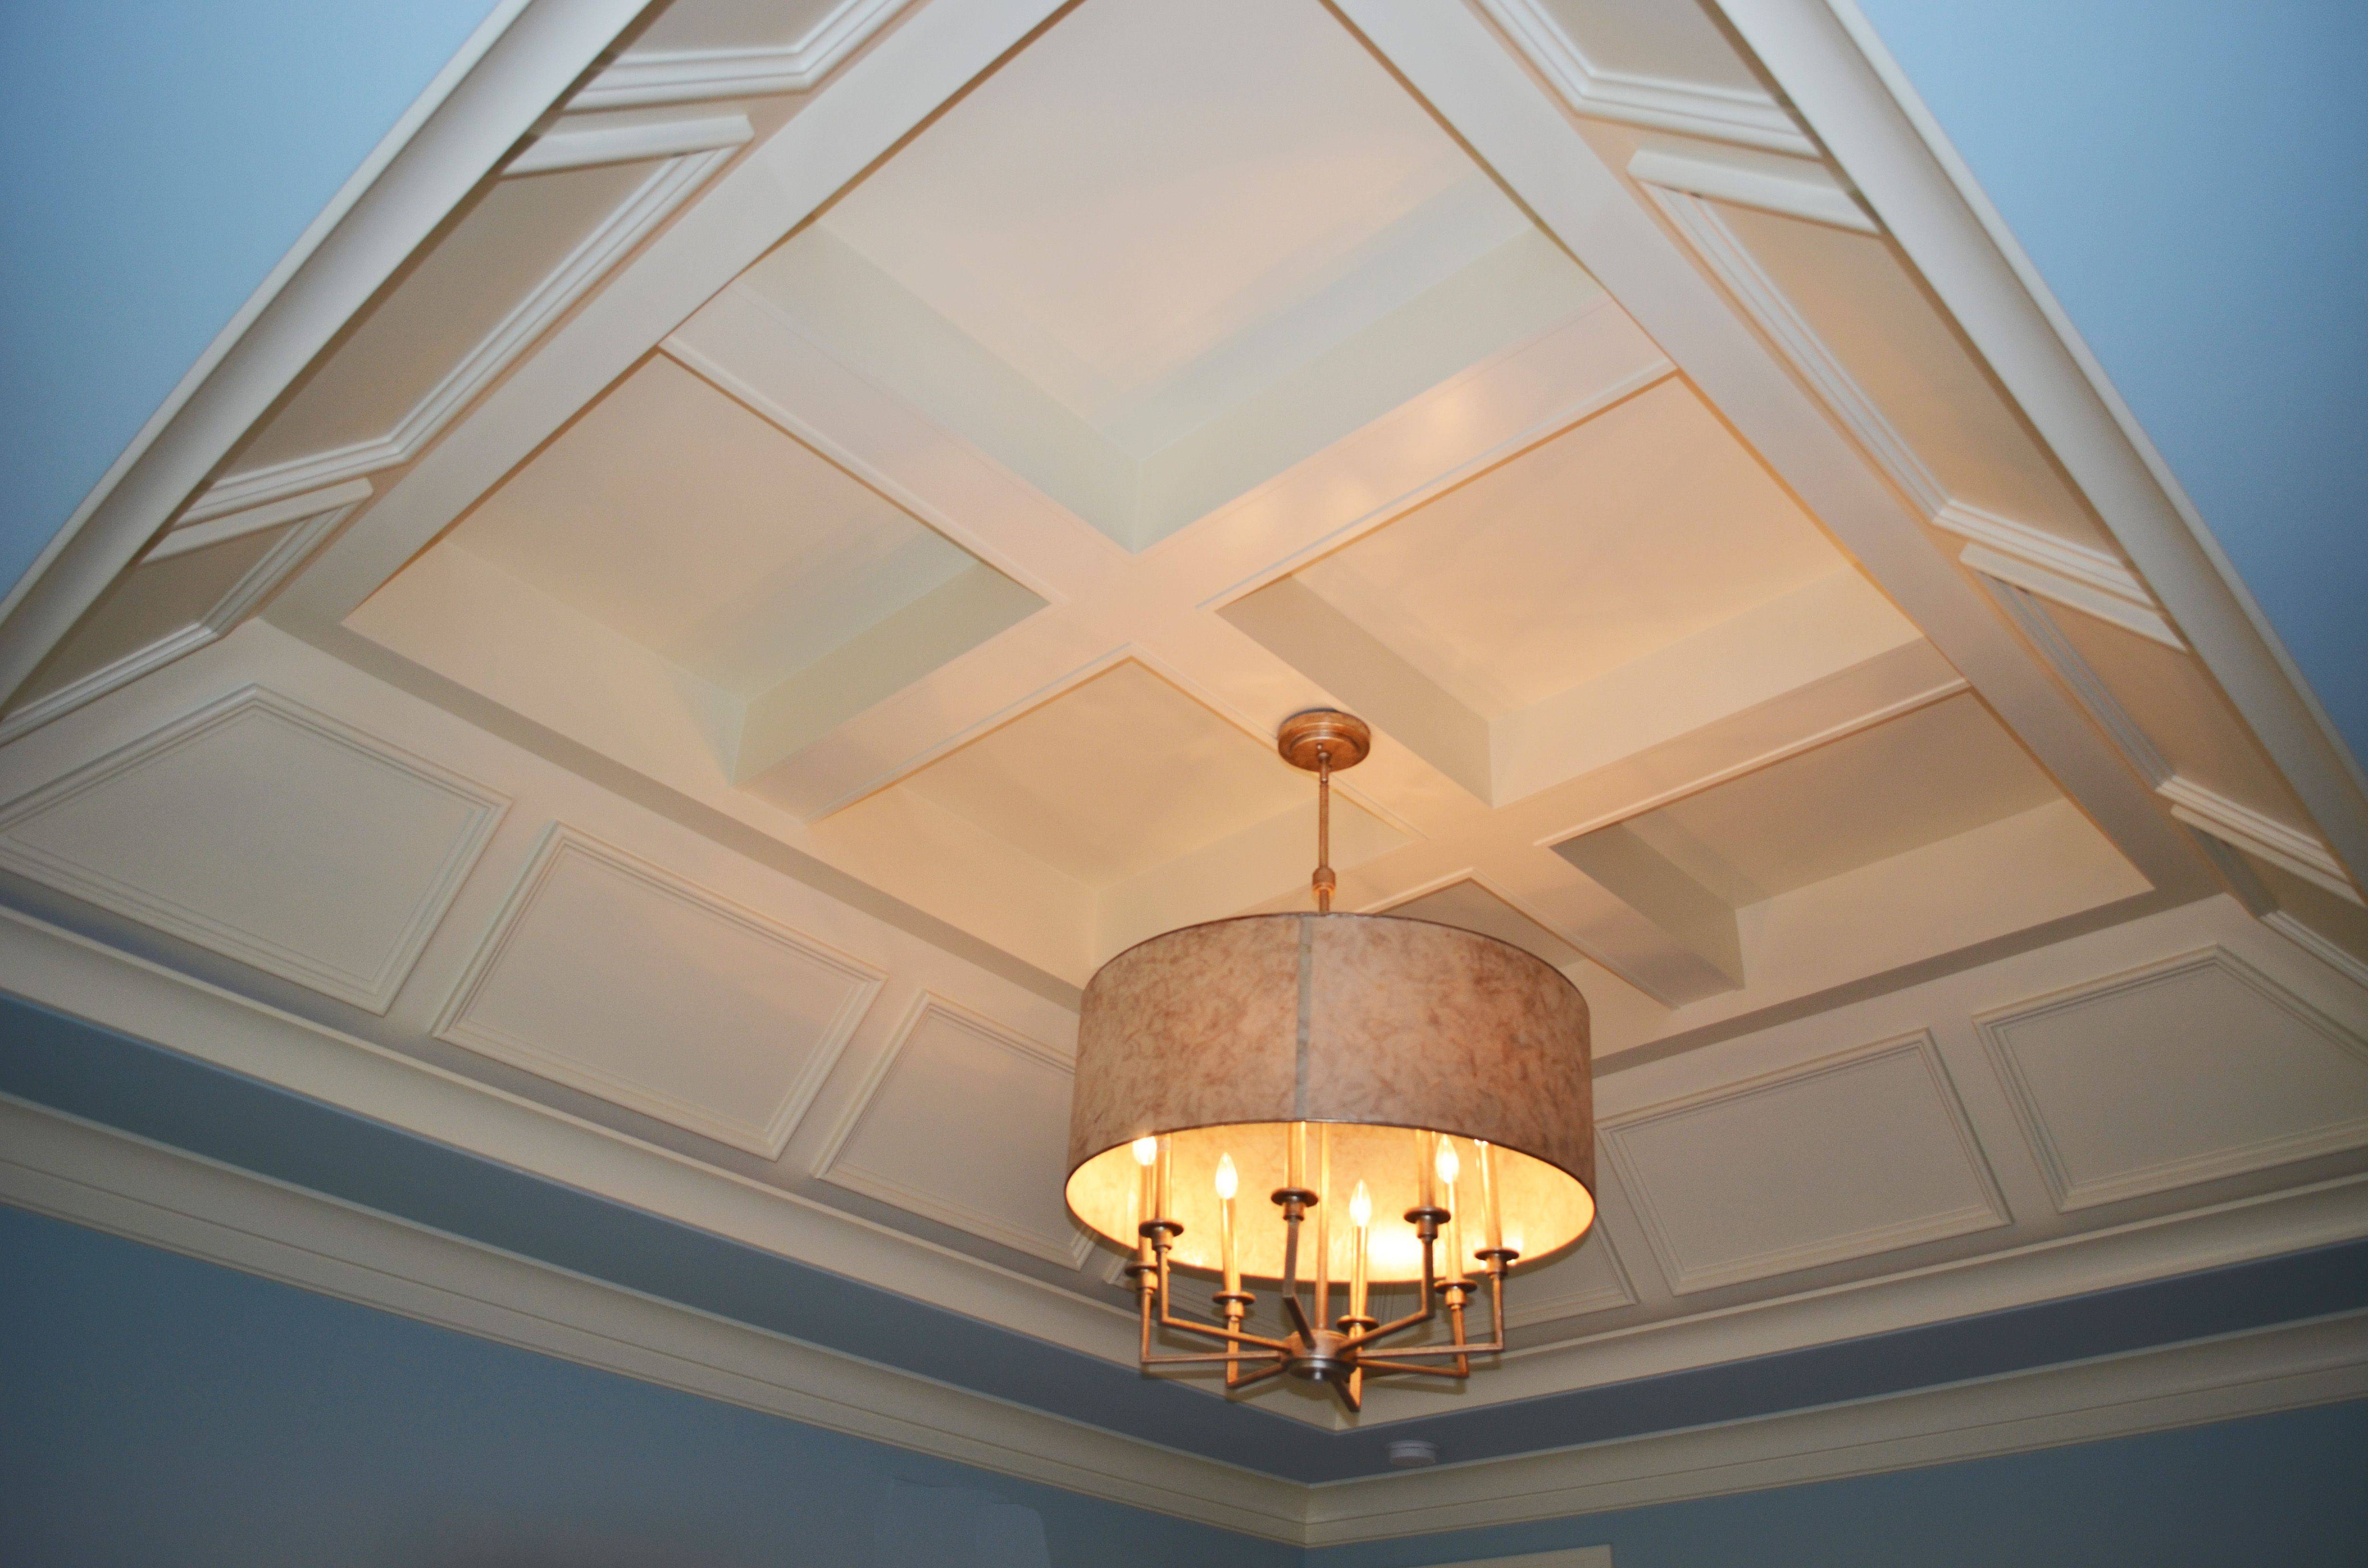 Types Of Ceiling Designs Beautiful Specialty Ceiling In Andrea Ii Sloped Hip Tray With Of Types Of Ceiling Designs 